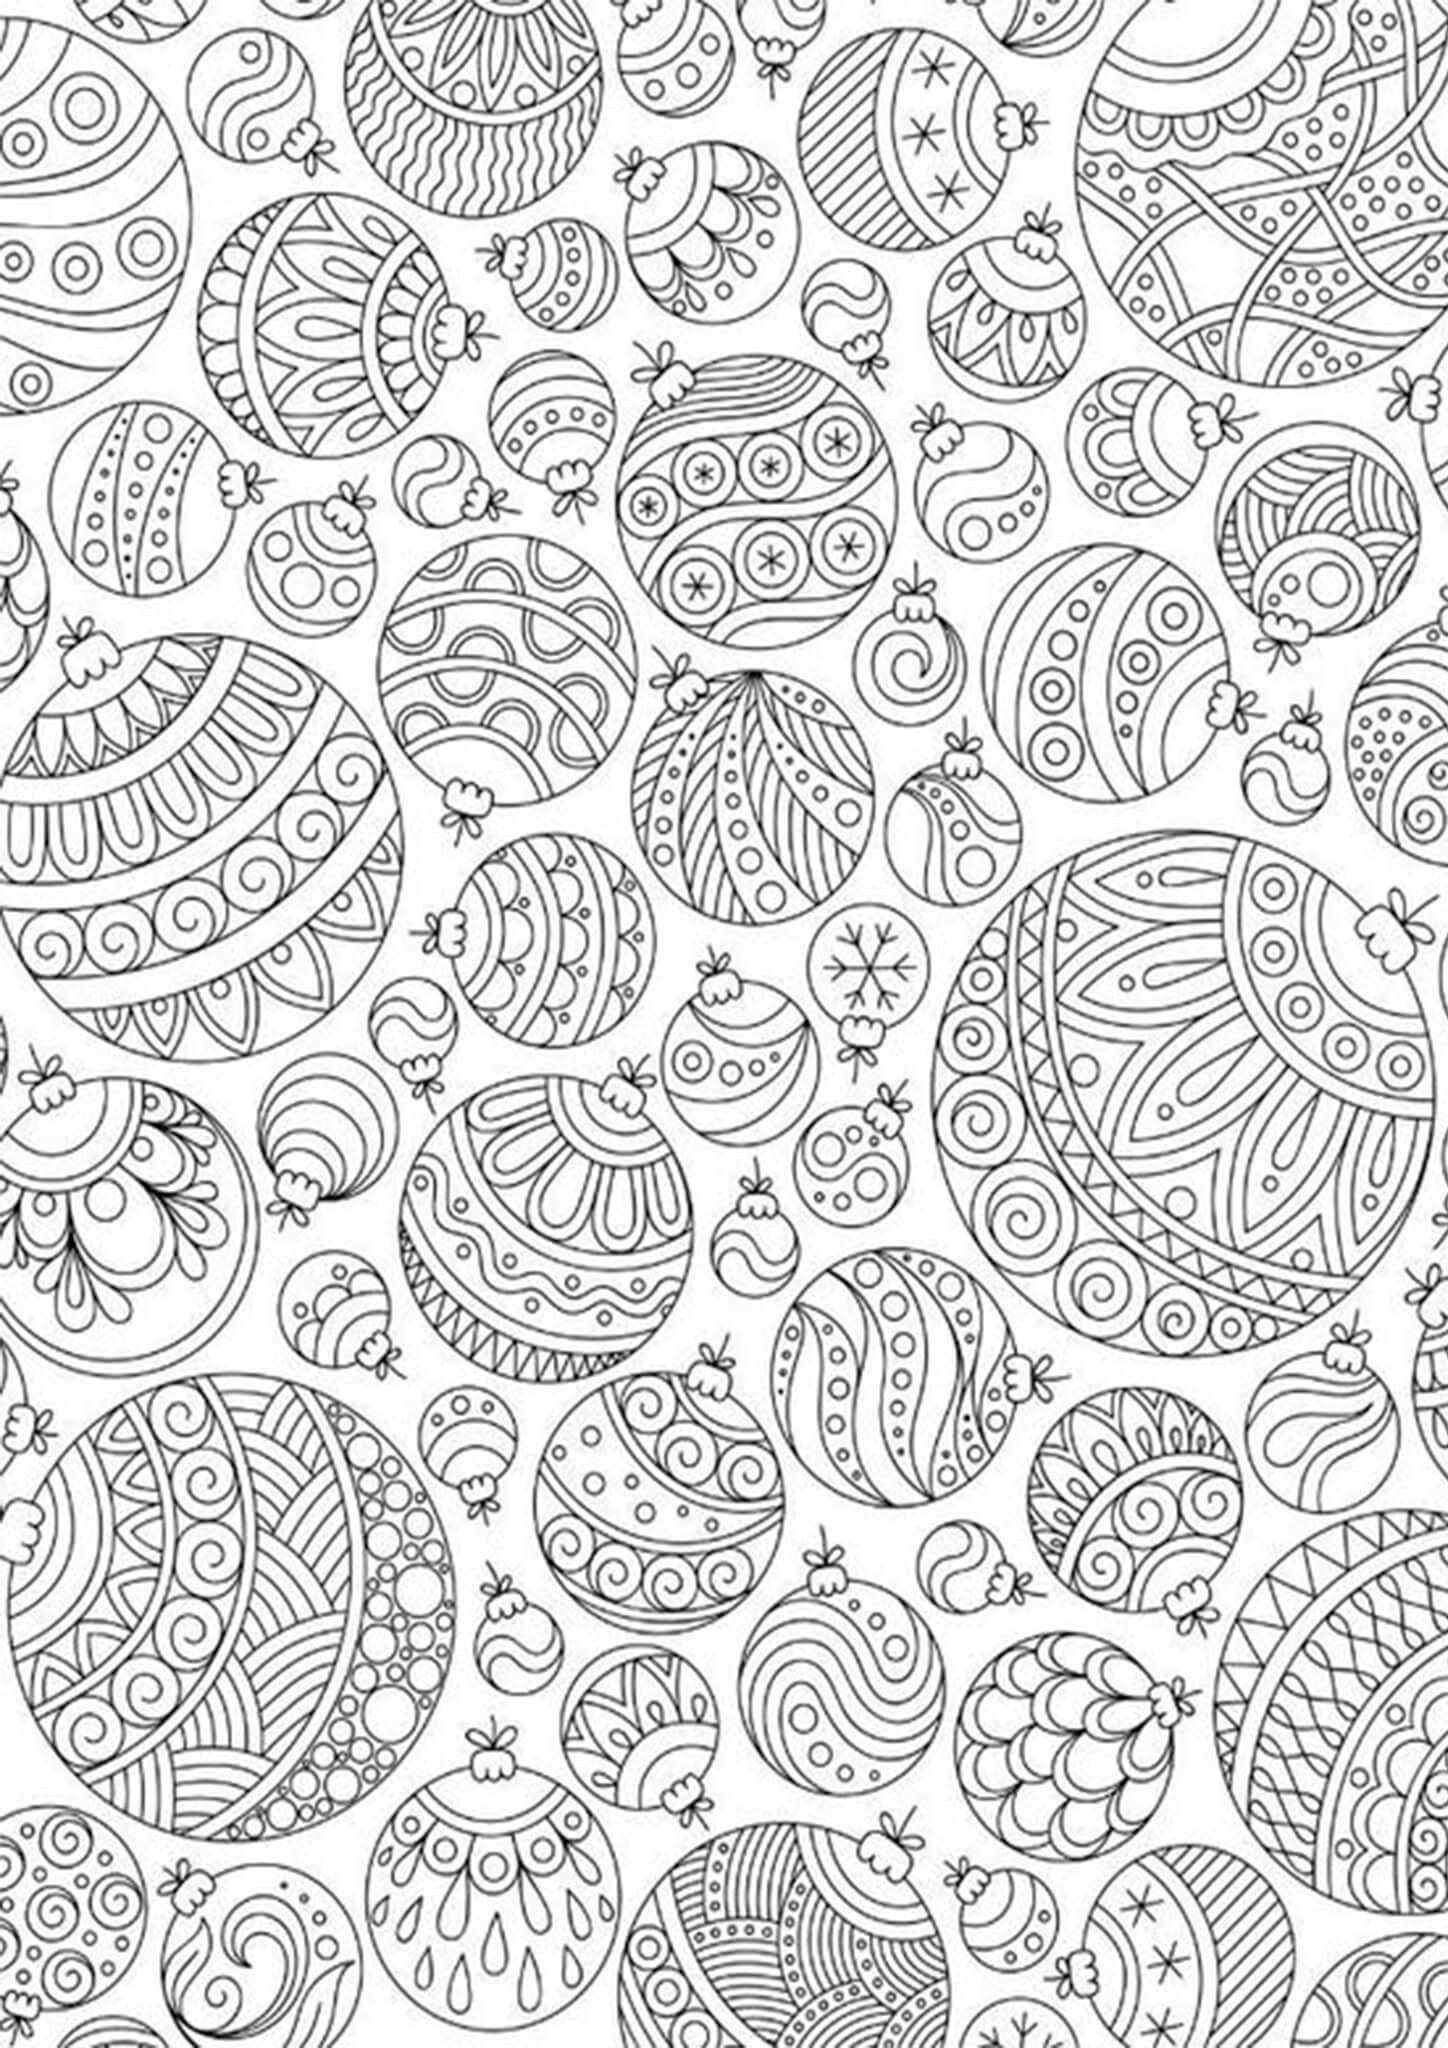 Free & Easy To Print Adult Christmas Coloring Pages   Tulamama Download